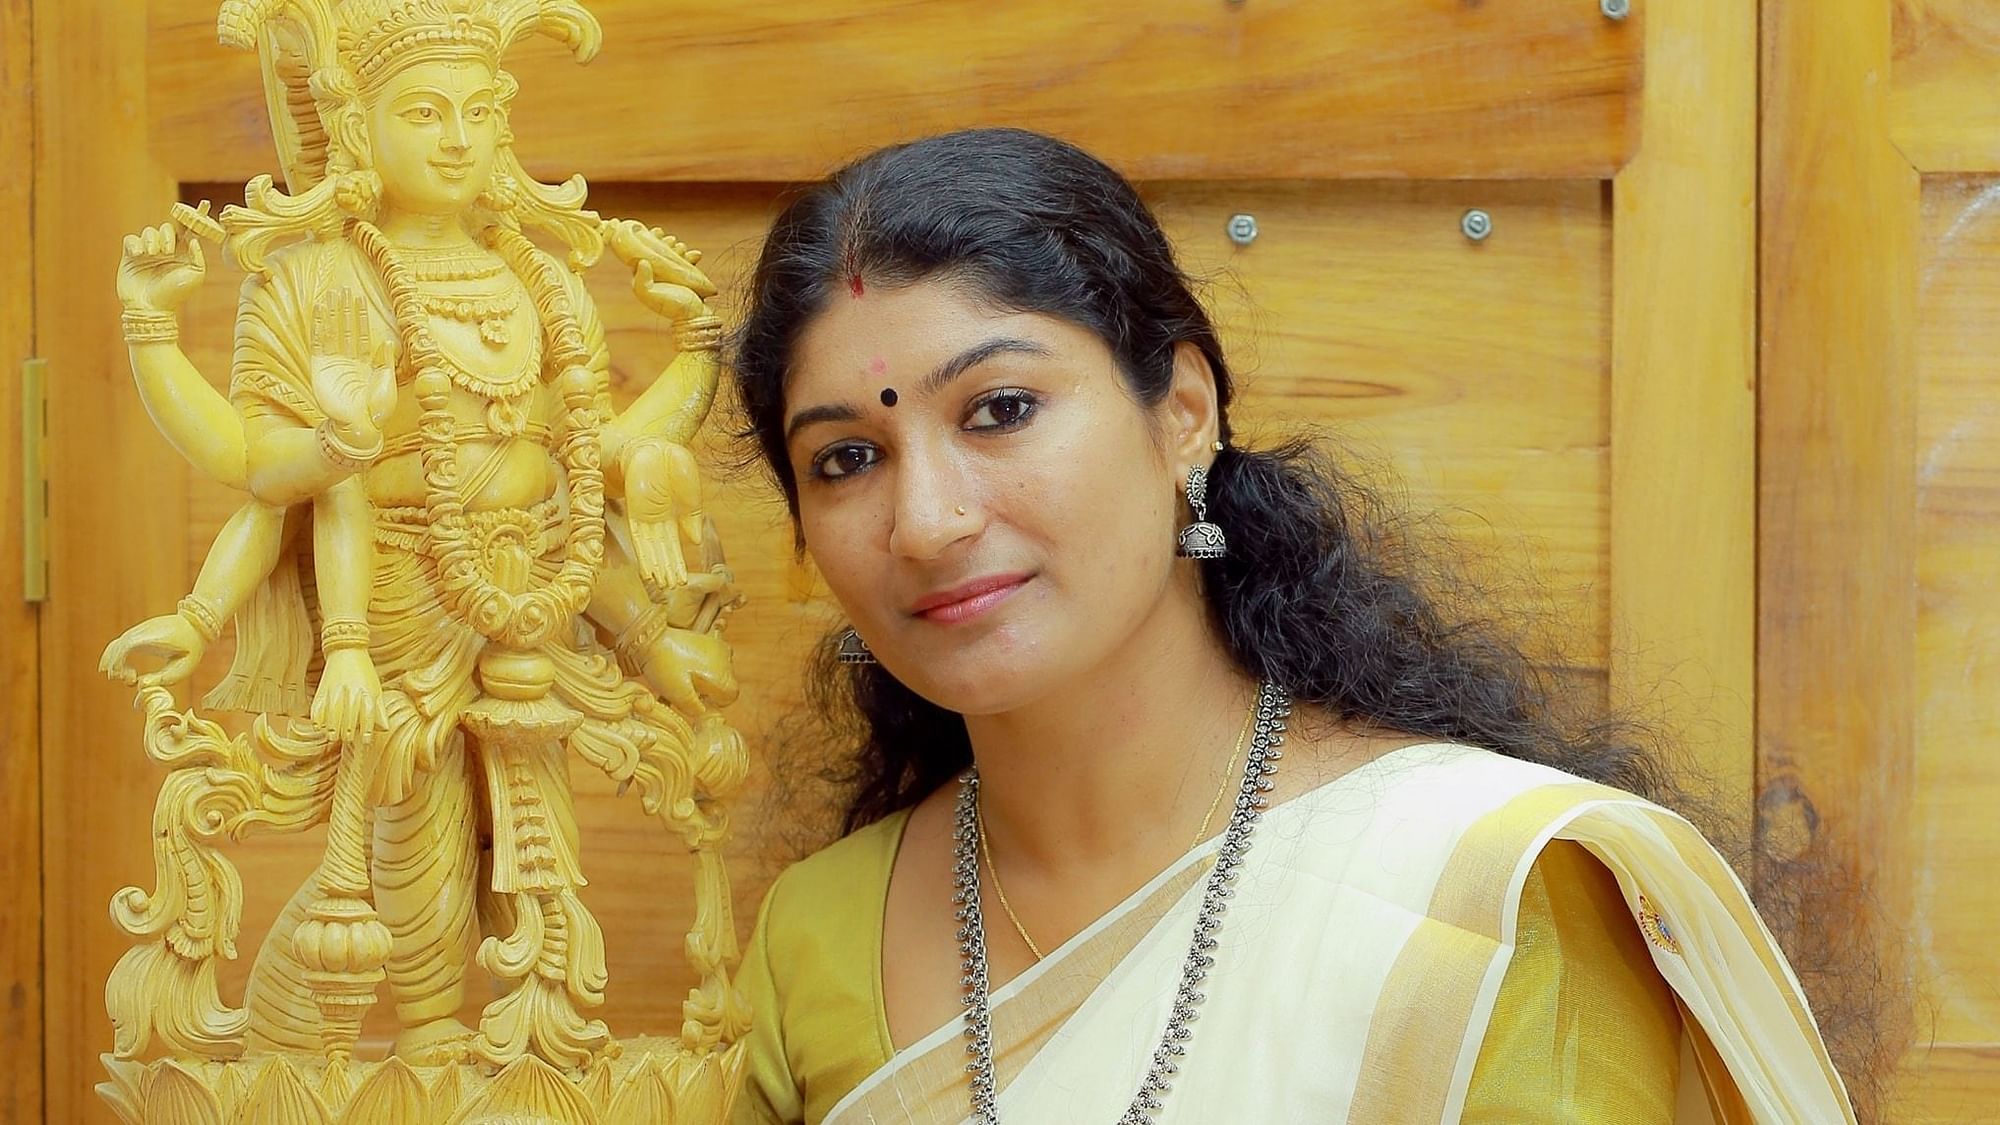 <div class="paragraphs"><p>Soumya Sukumaran, the founder-director of Kalanjali foundation of performing arts, alleged the temple authorities cancelled her dance performance scheduled for 21 April as she is a non-Hindu.</p></div>